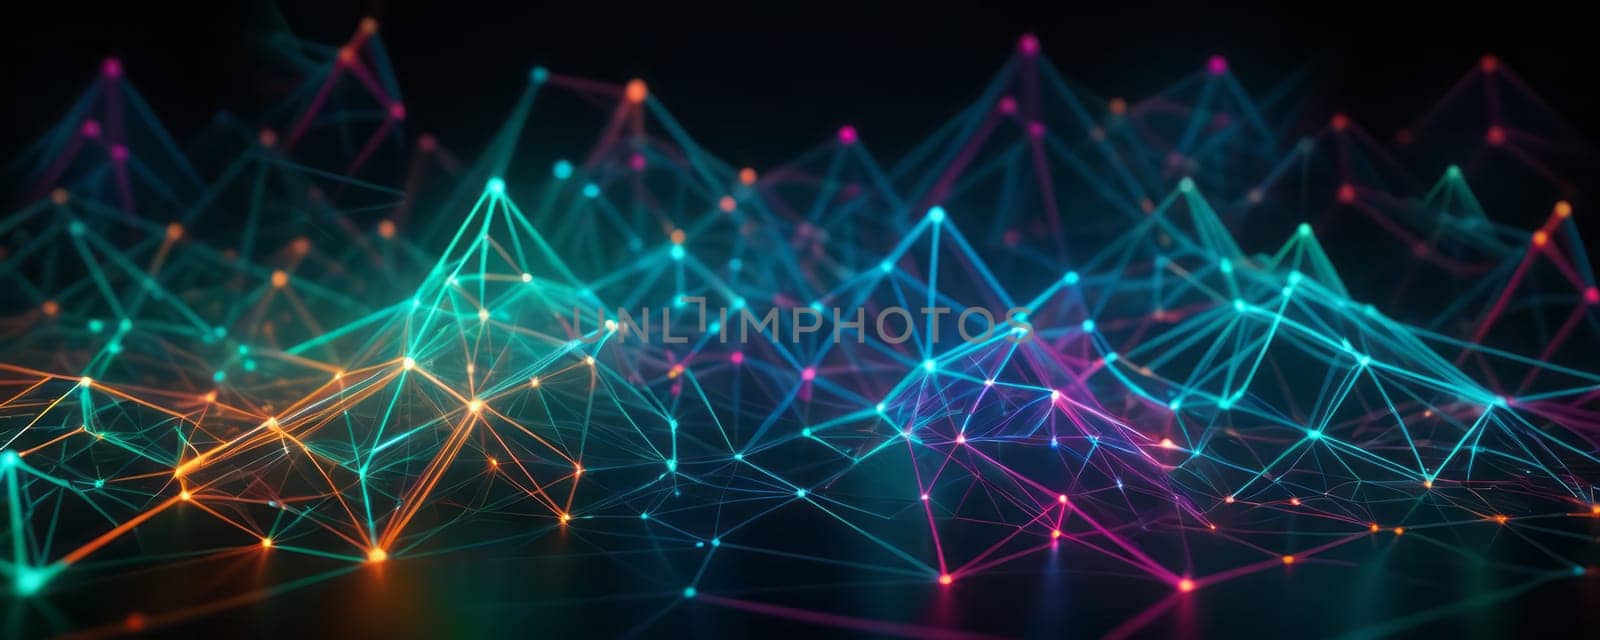 Dynamic Web of Illuminated Lines and Dots by nkotlyar